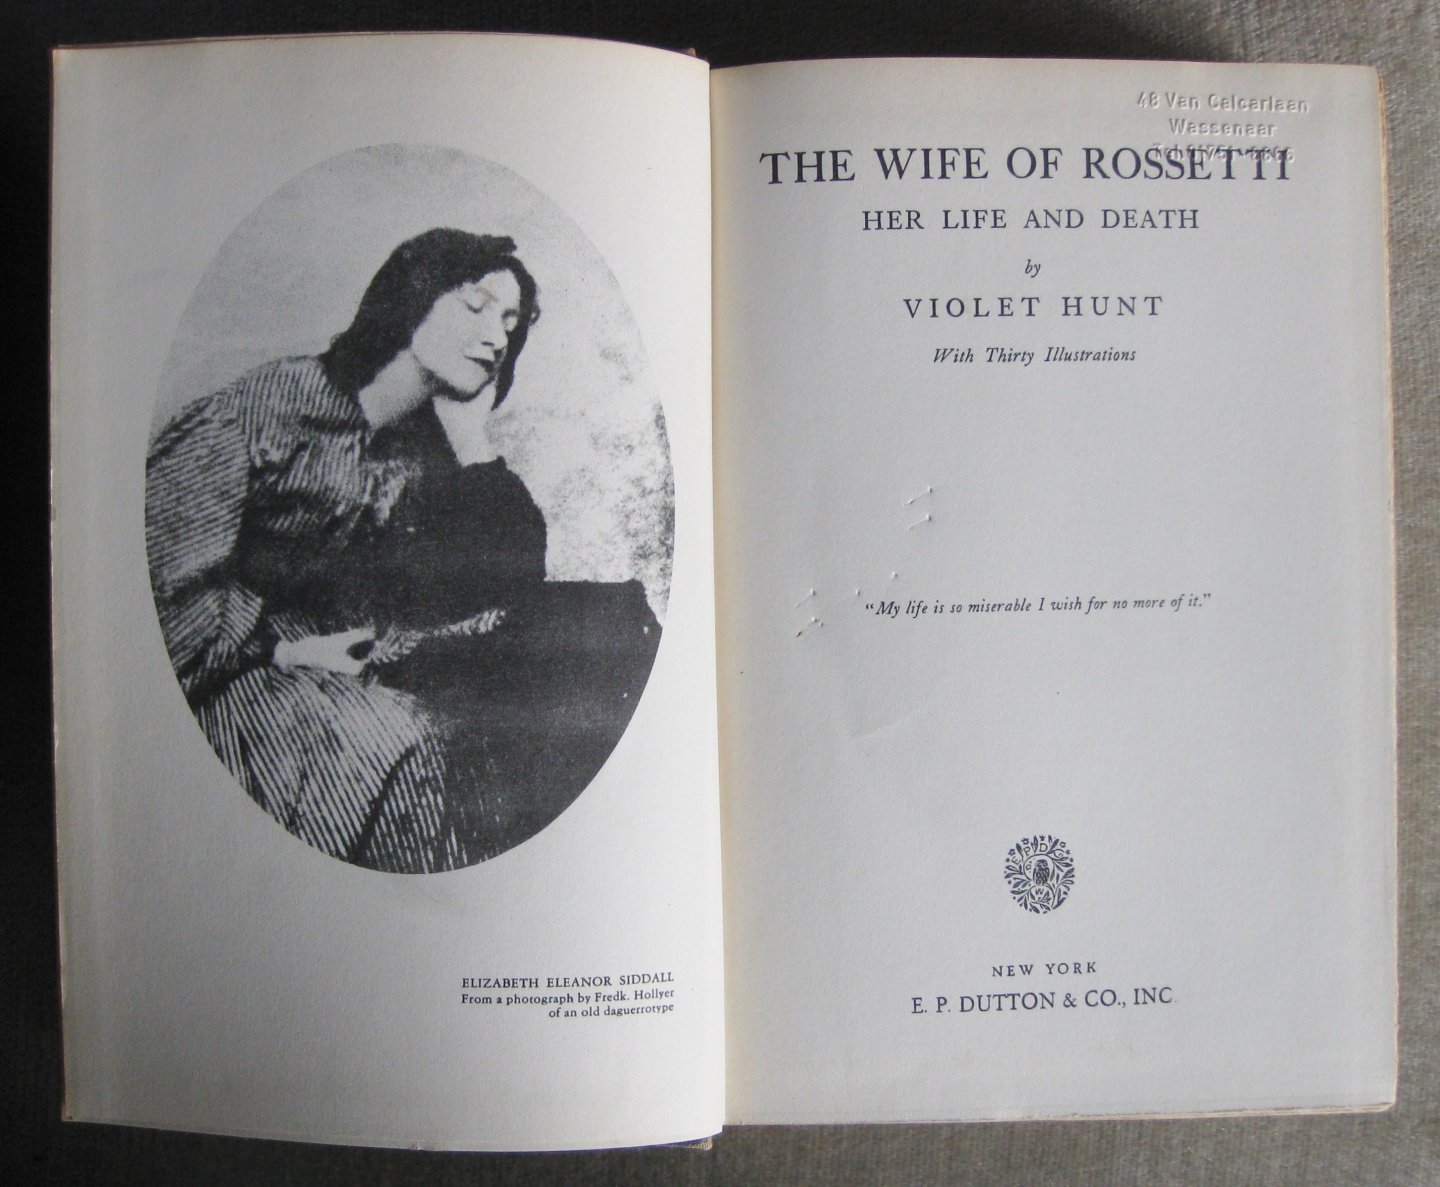 Hunt, Violet - The wife of Rossetti  -  Her life and death